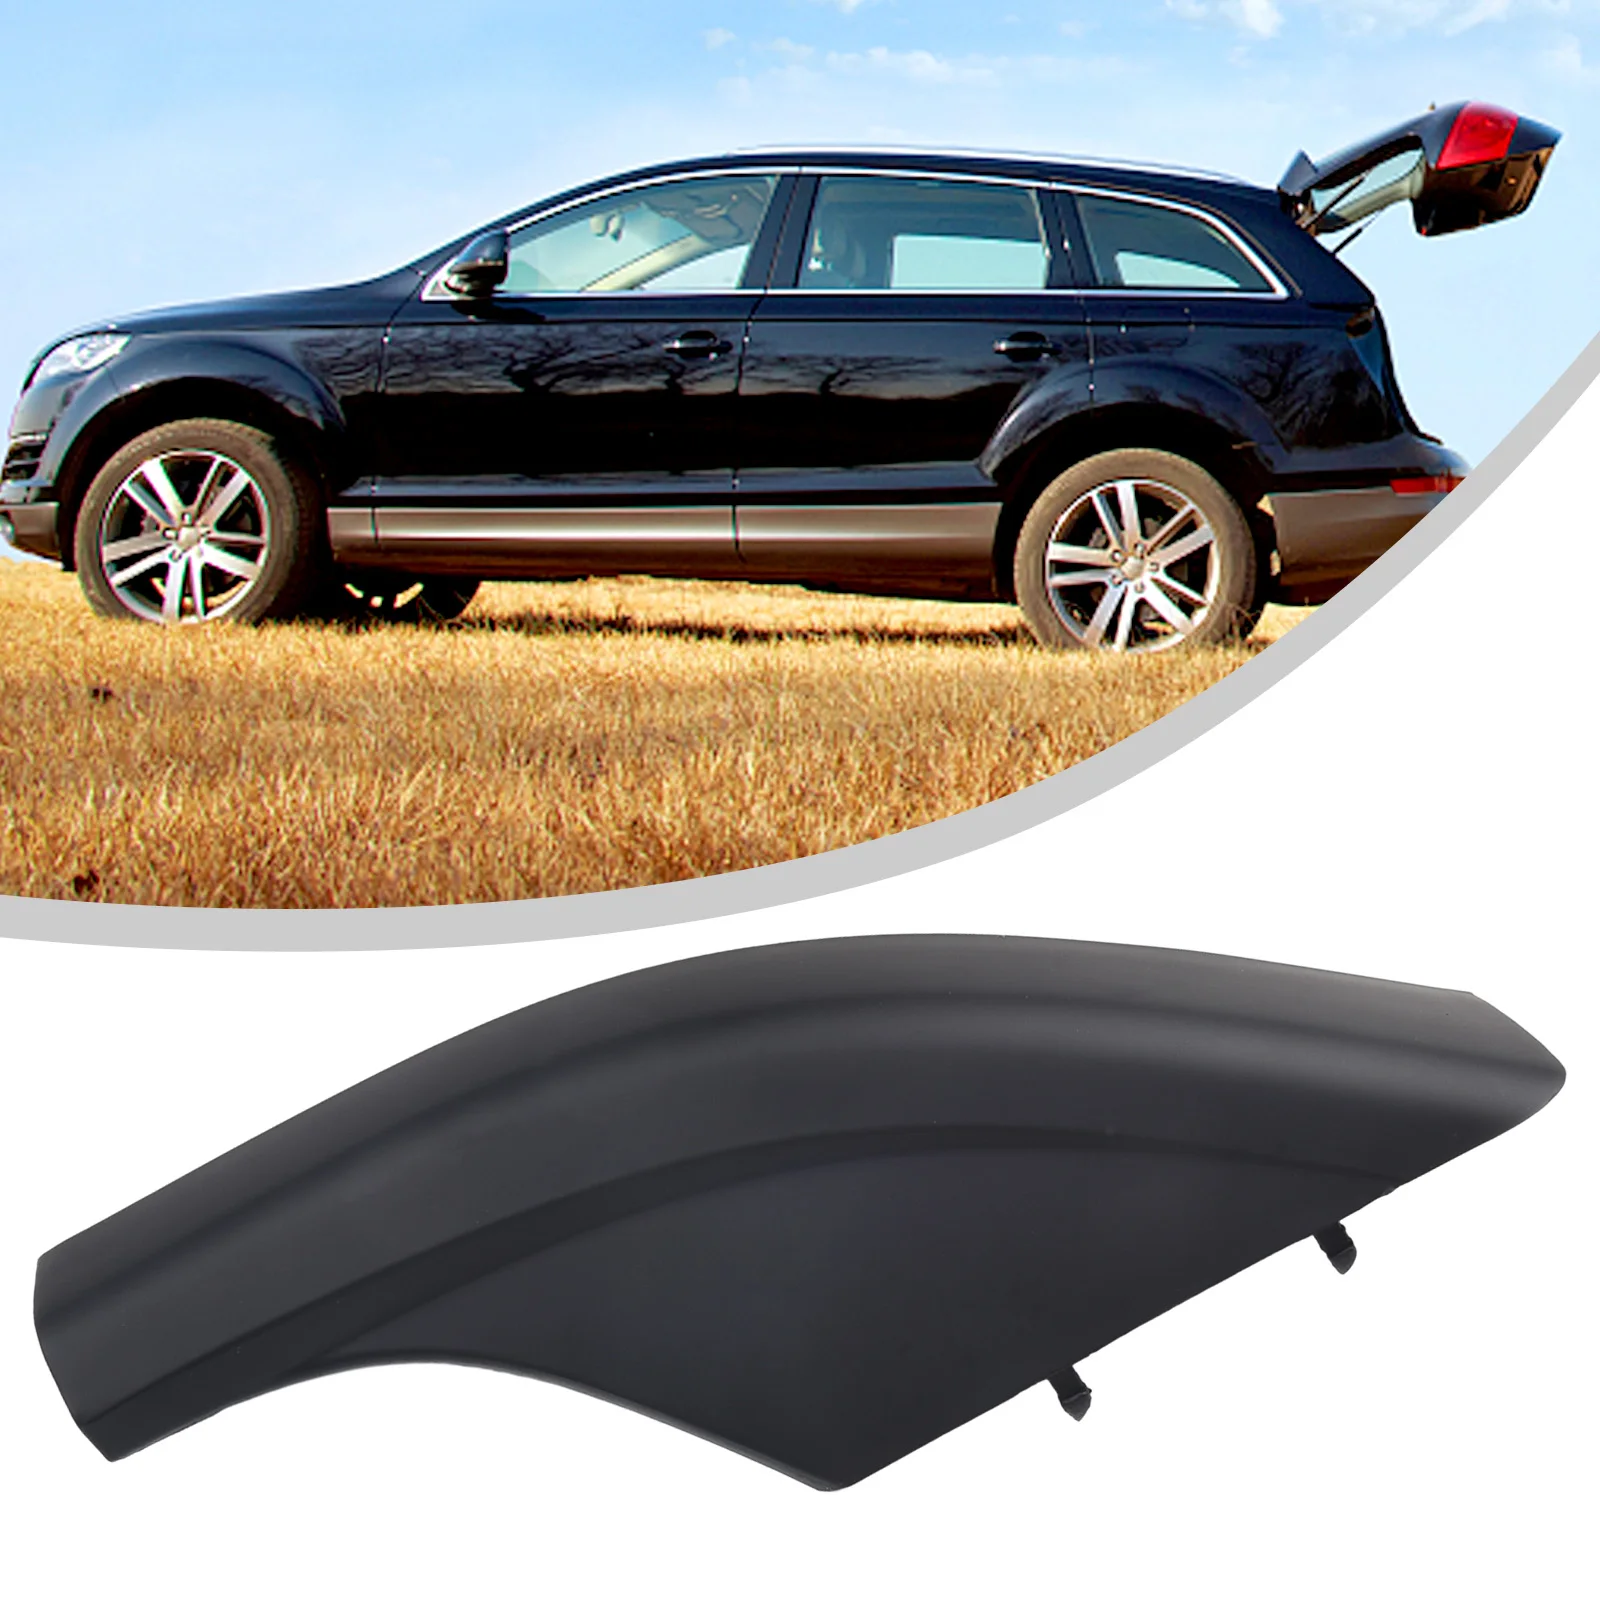 

Left rear Luggage rack cover for Hyundai Santa Fe 2002 2006, OE 8729526001, Easy to install, Made of long lasting material